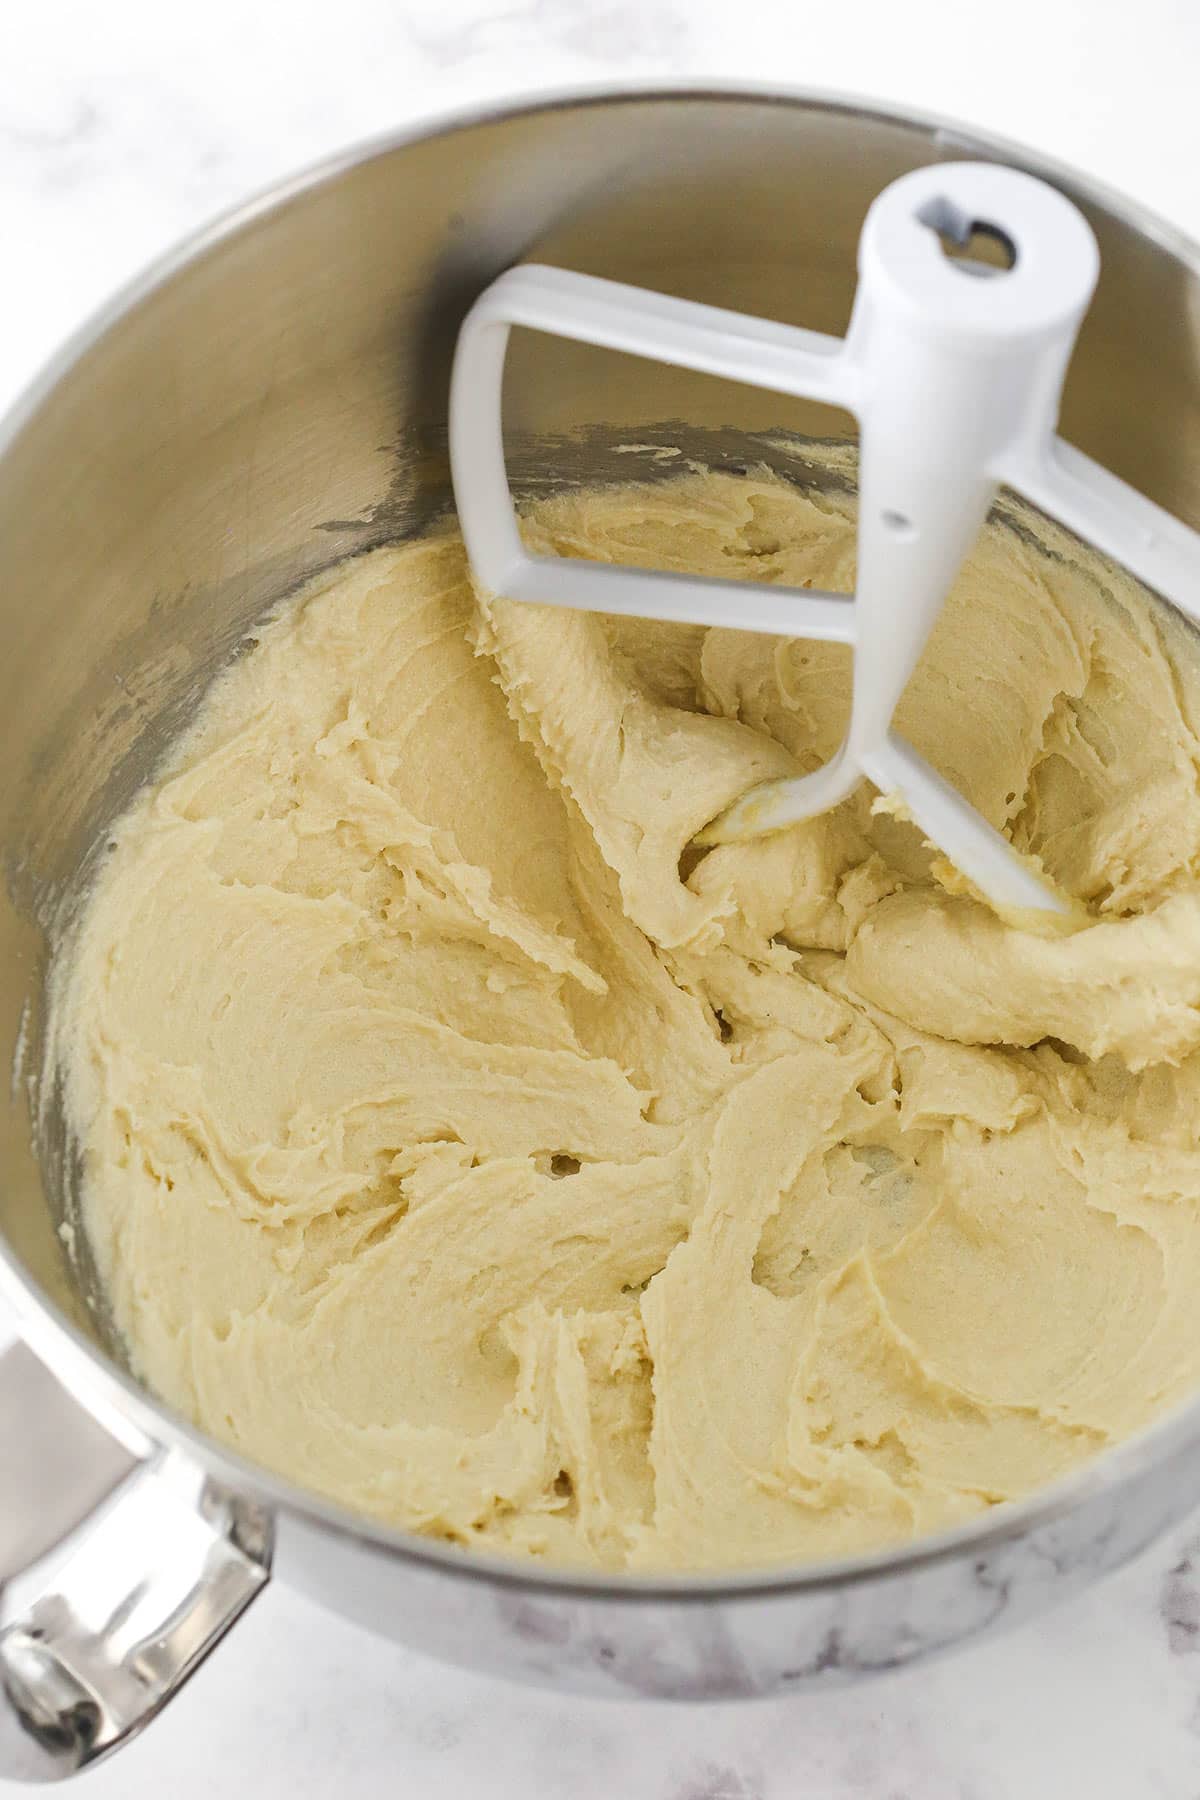 Creamed butter and sugar inside of a large metal mixing bowl with the whisk attachment inside